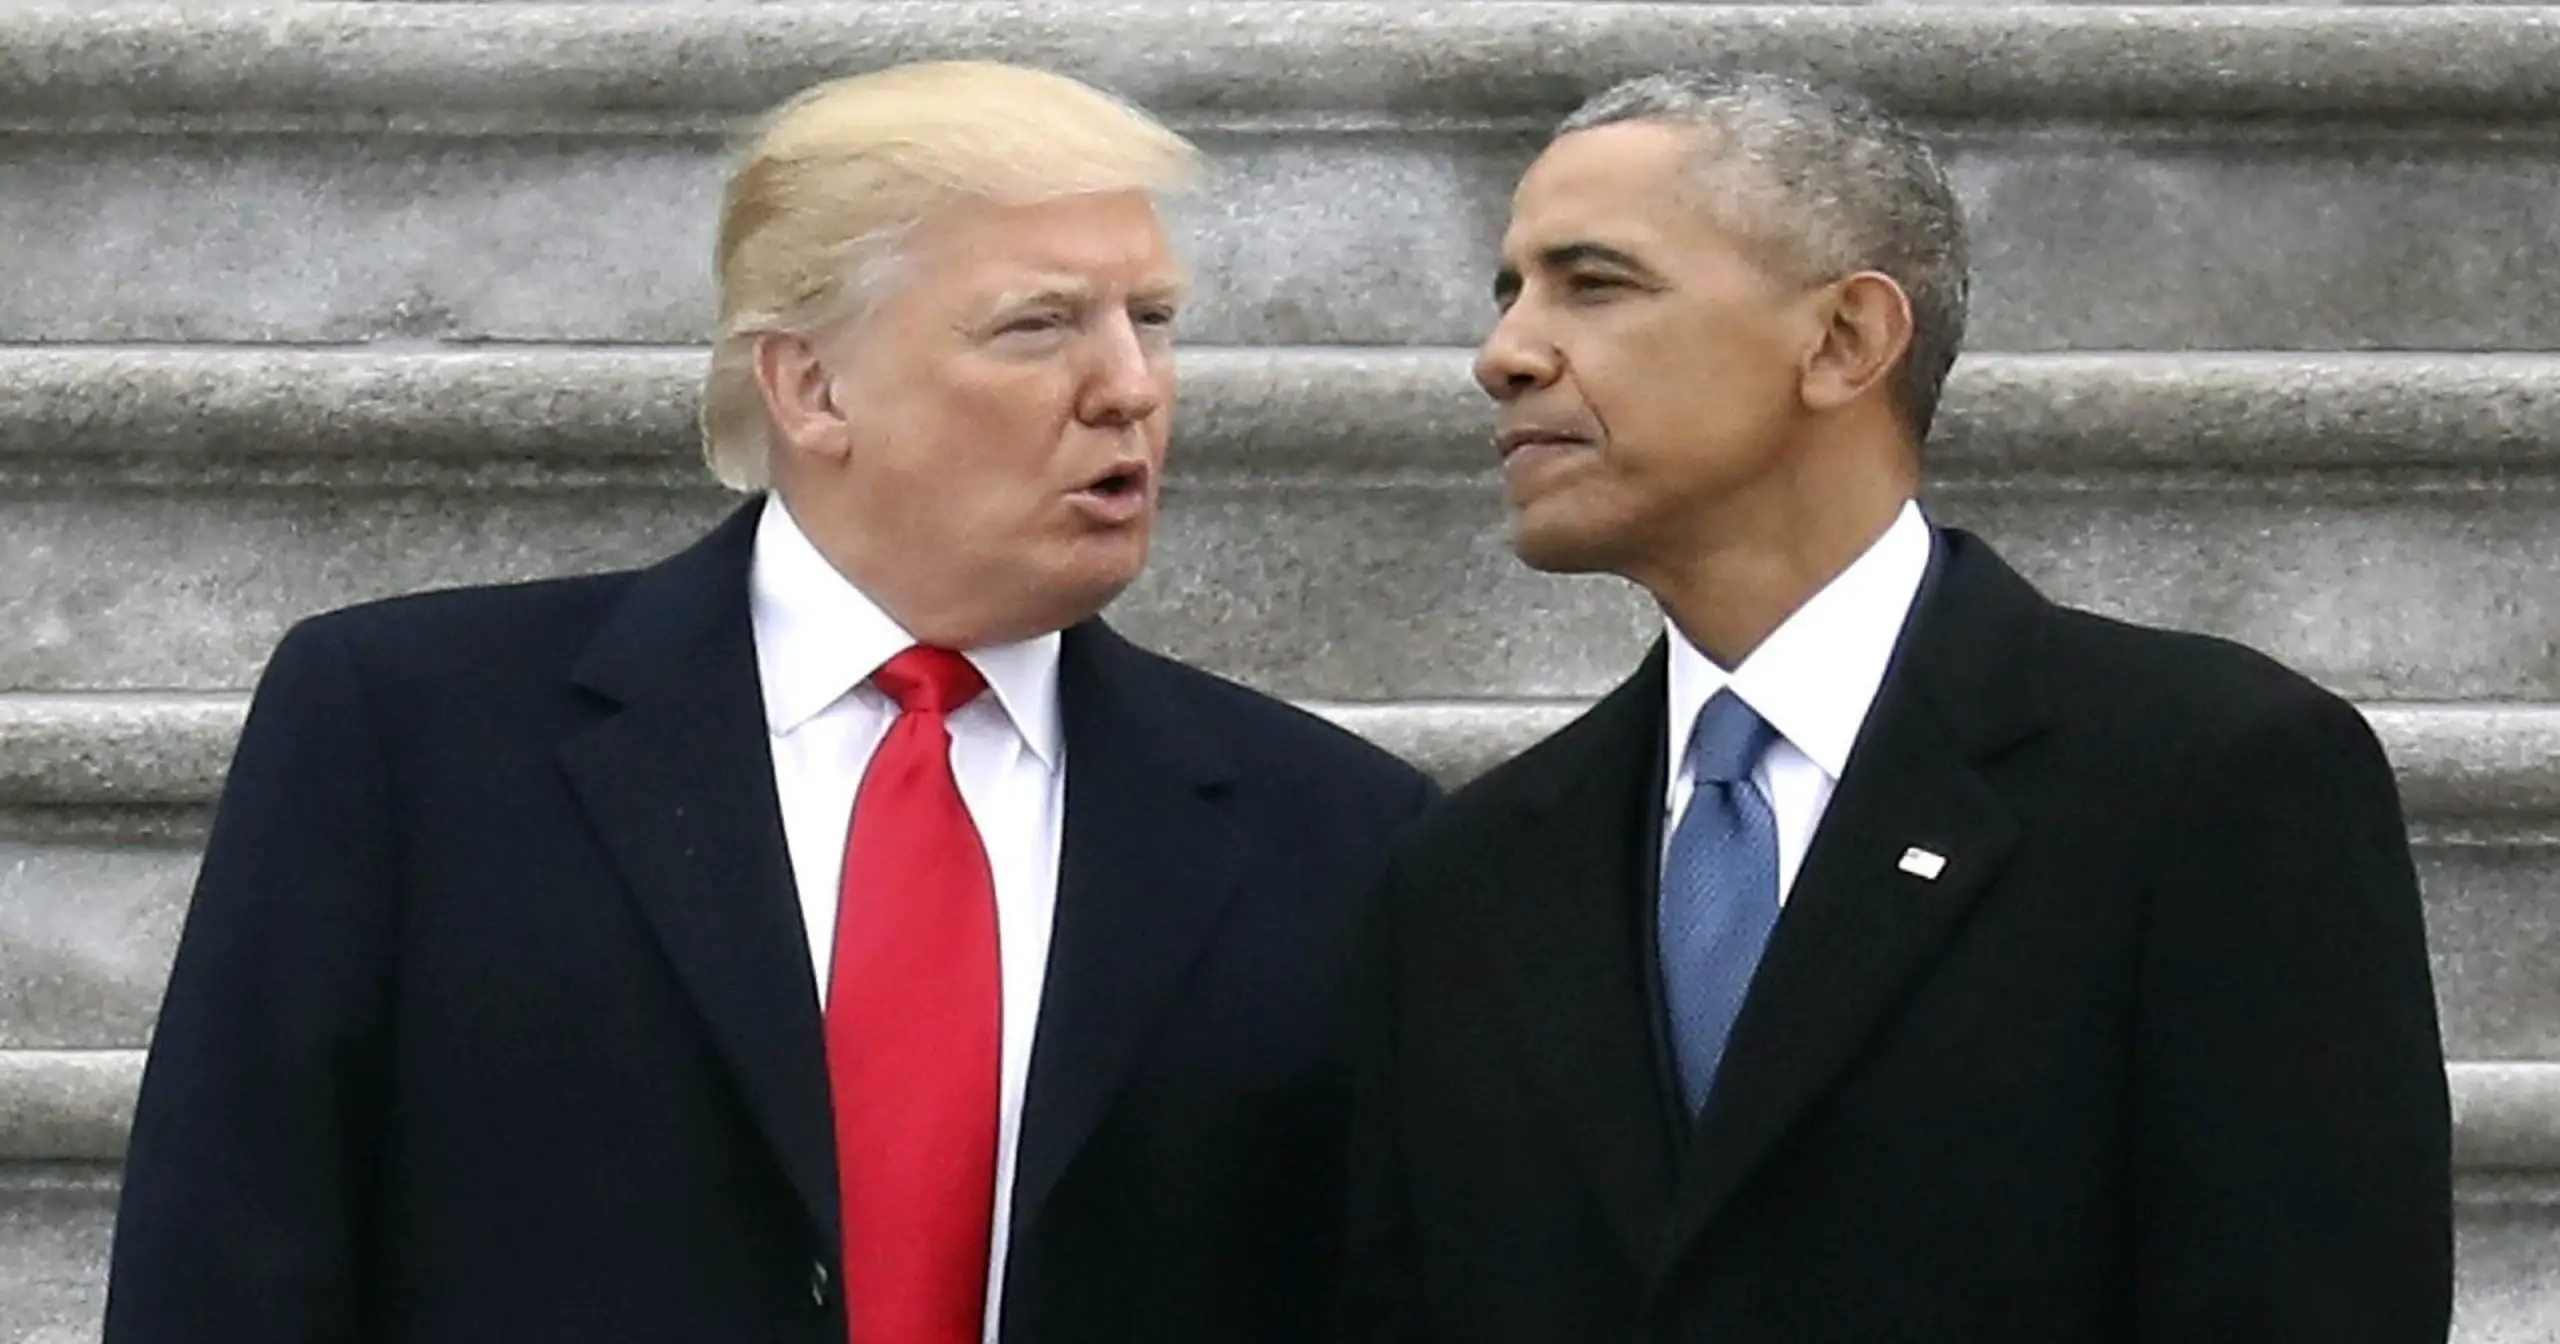 Survey finds Trump is worst president ever, Obama in top 10